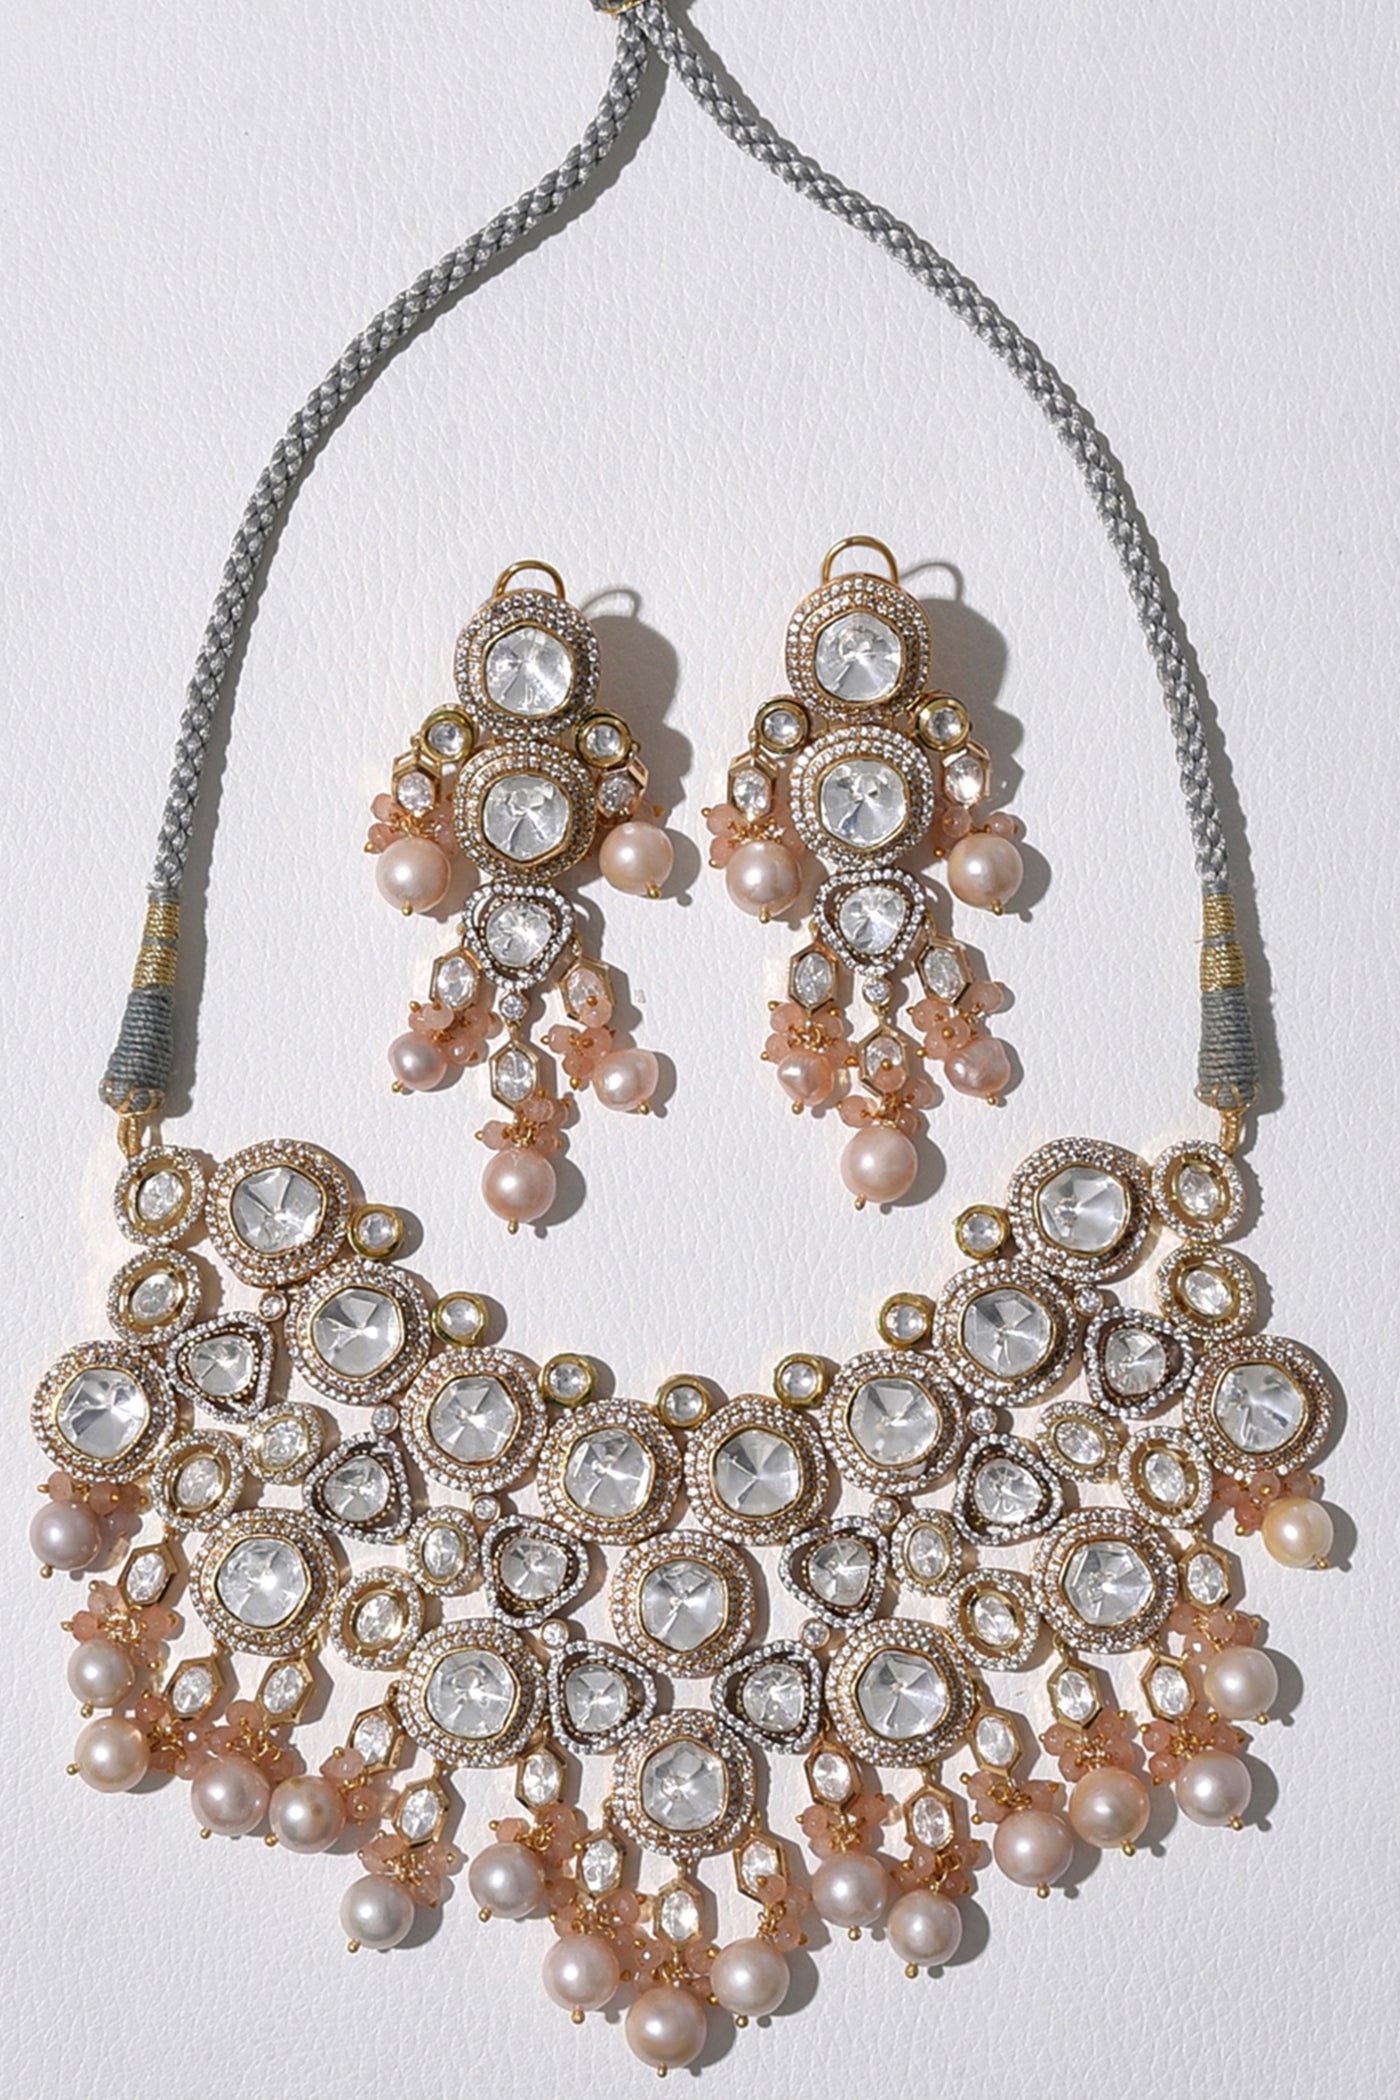 Joules by RadhikaBaroque Pearl And Polki Necklace Set jewellery indian designer wear online shopping melange singapore